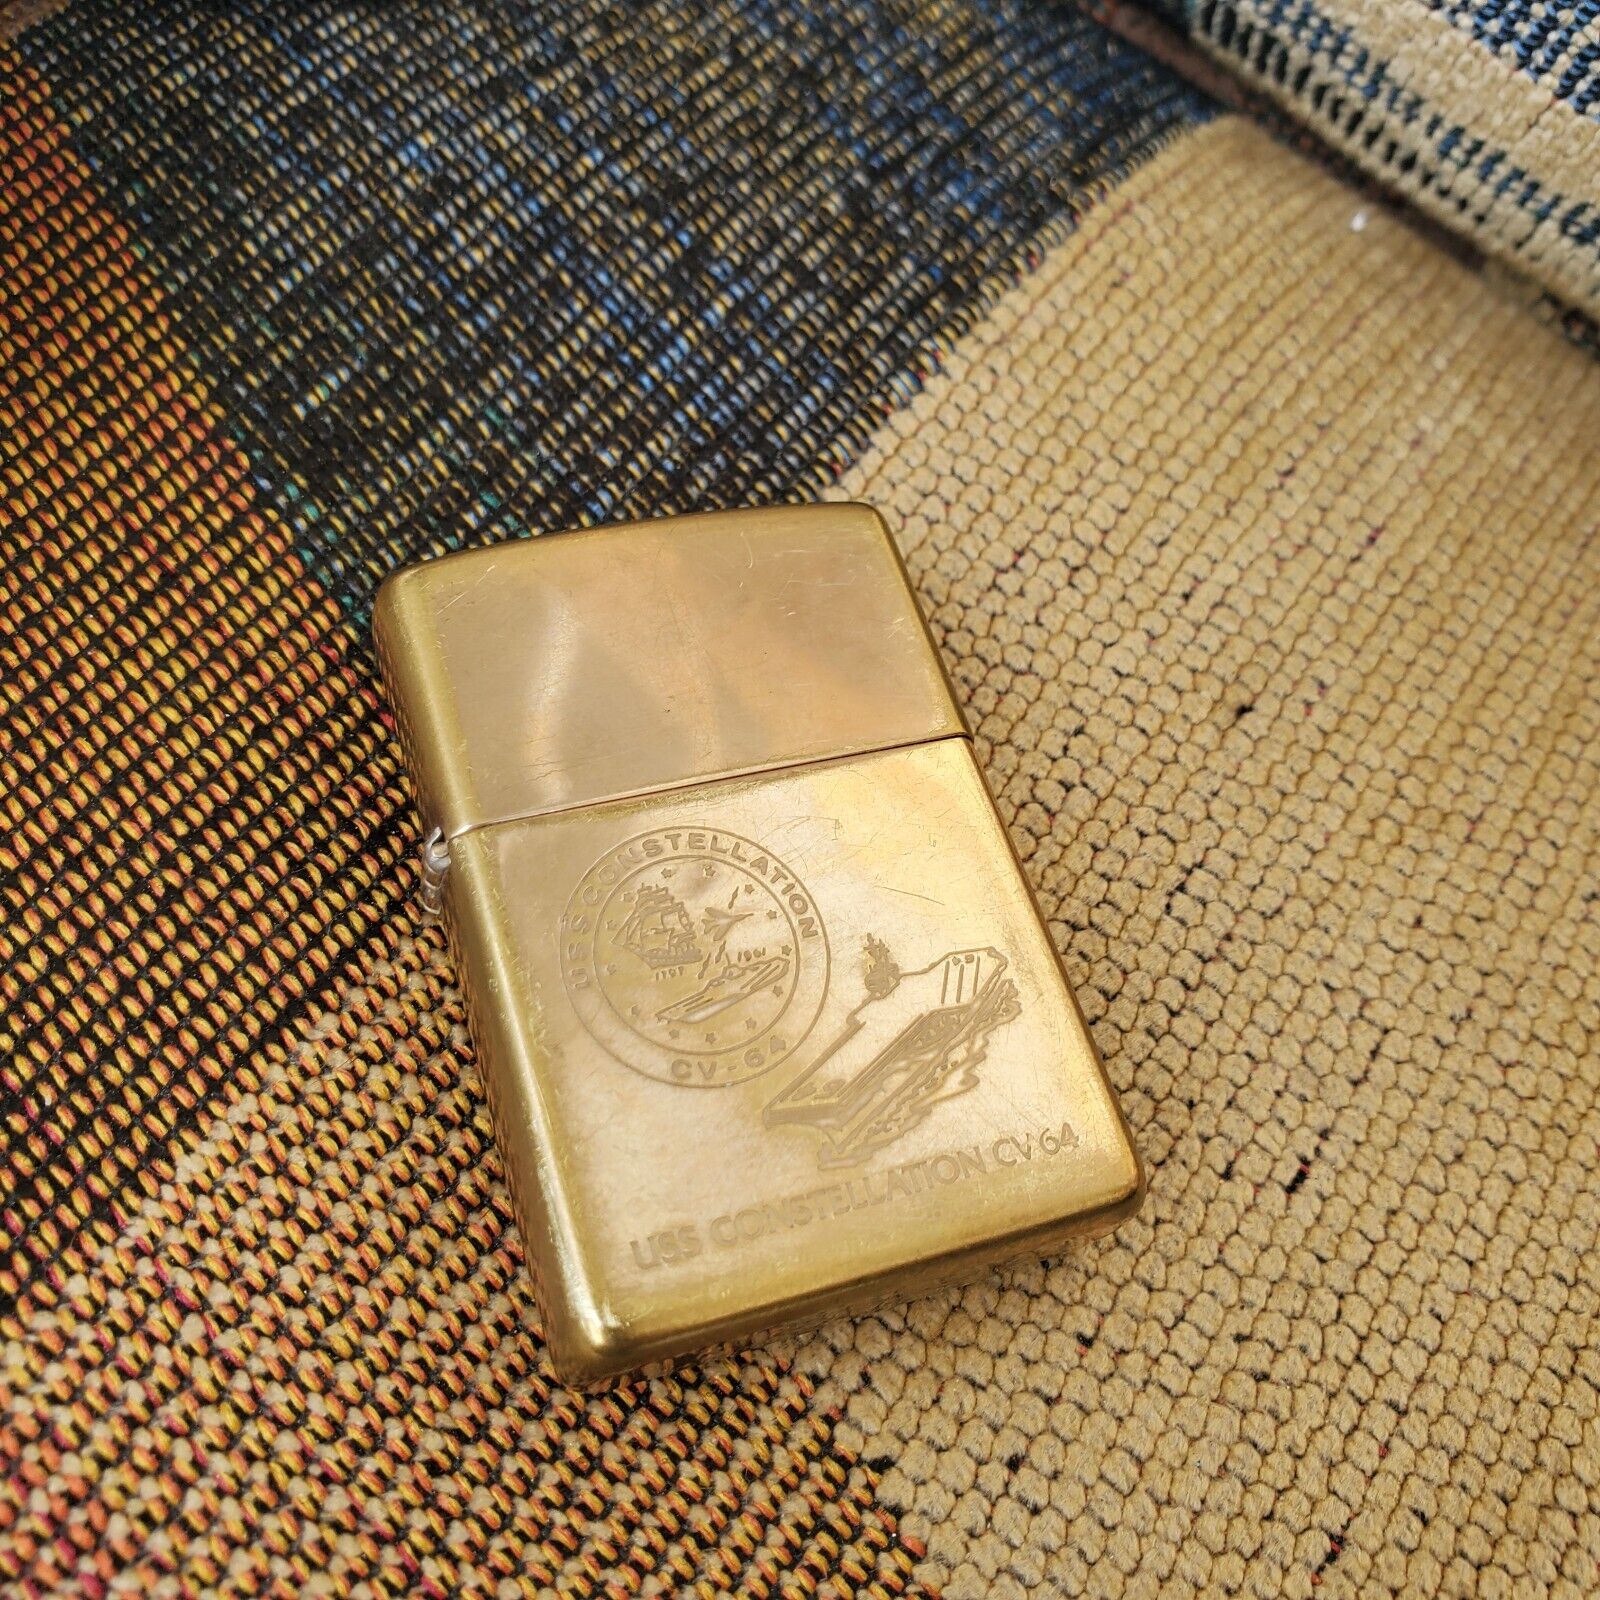 Vintage Zippo USS Constellation CV-64 Made In USA H Zippo 01 Used Empty Gold Col